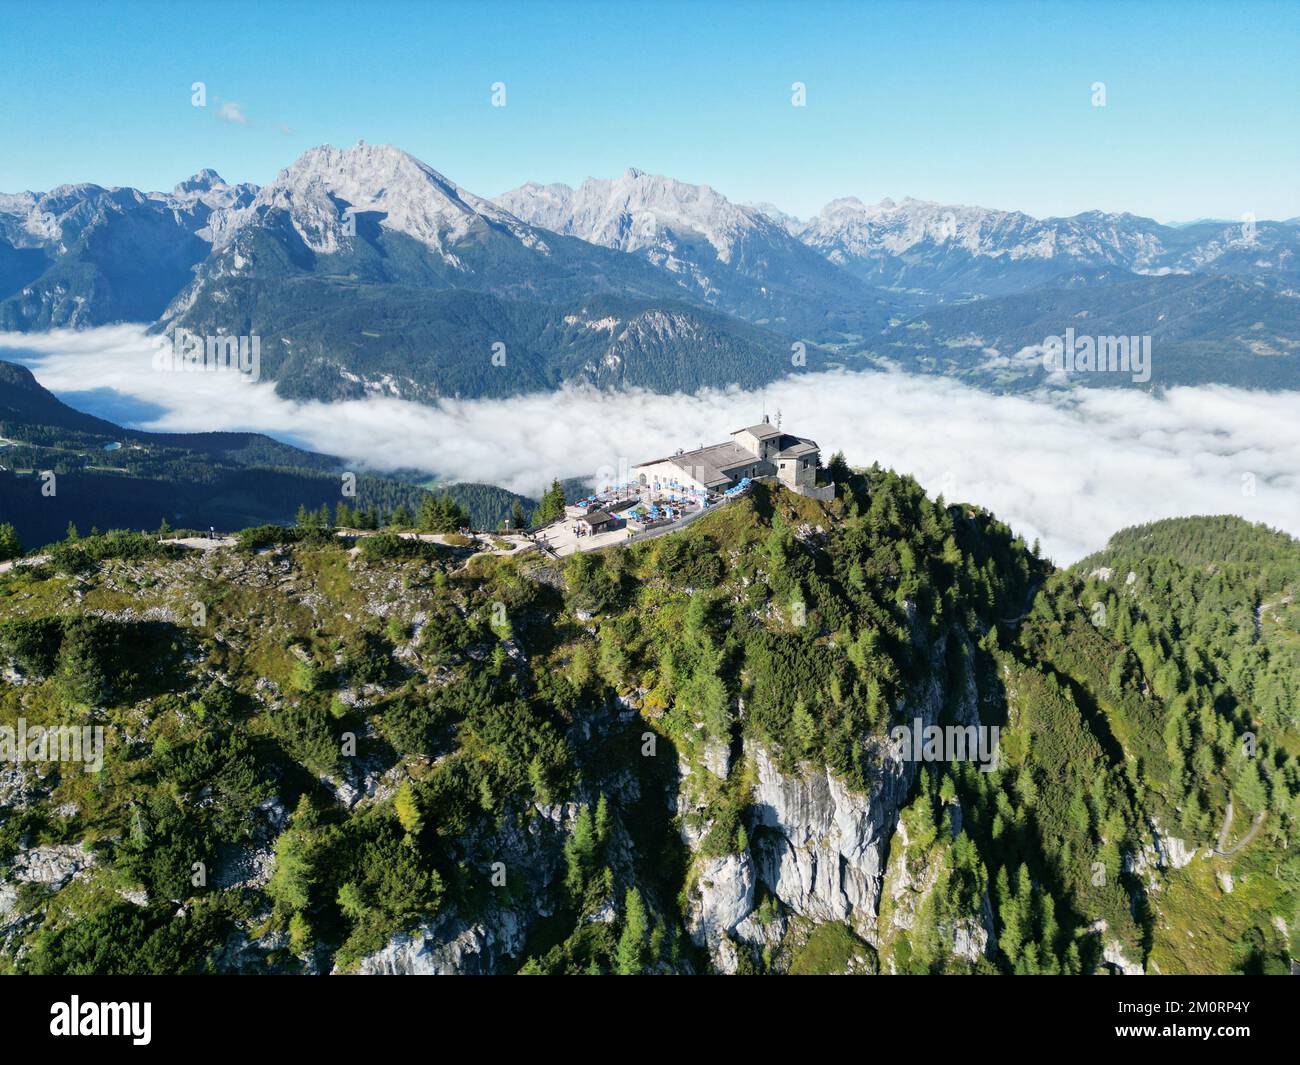 Eagles nest Kehlsteinhaus Germany drone aerial view Stock Photo